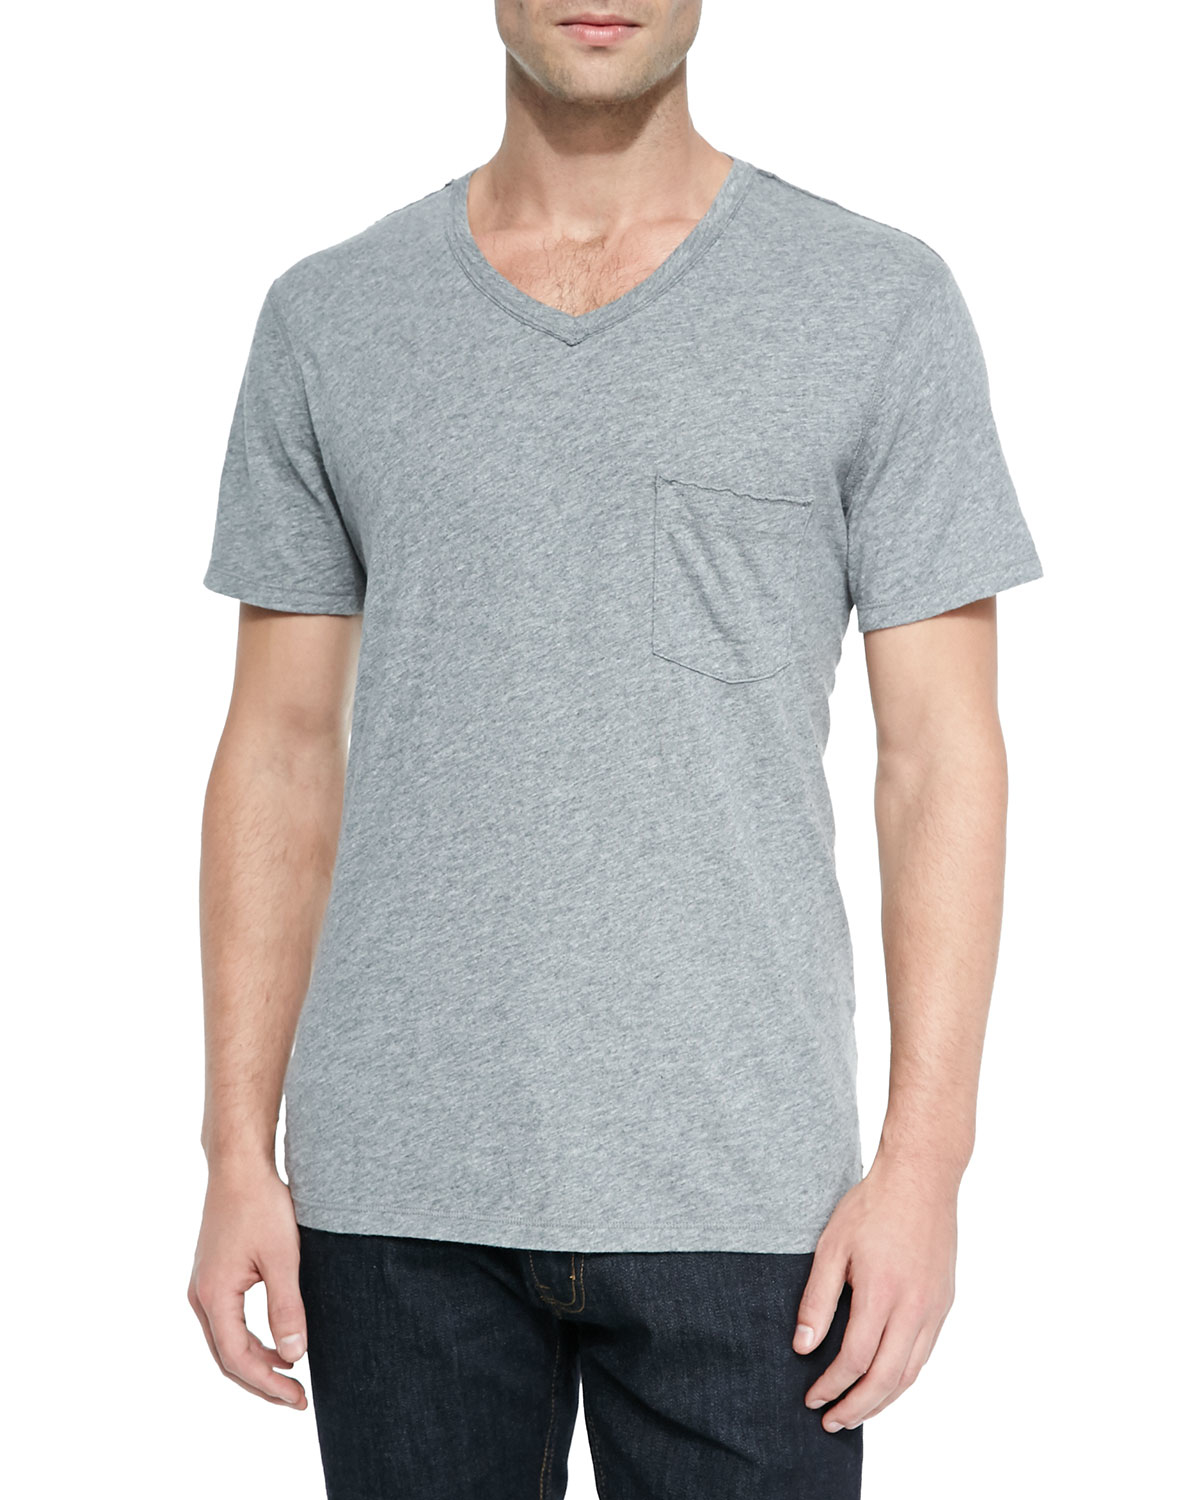 Lyst - 7 for all mankind V-Neck Cotton T-Shirt in Gray for Men